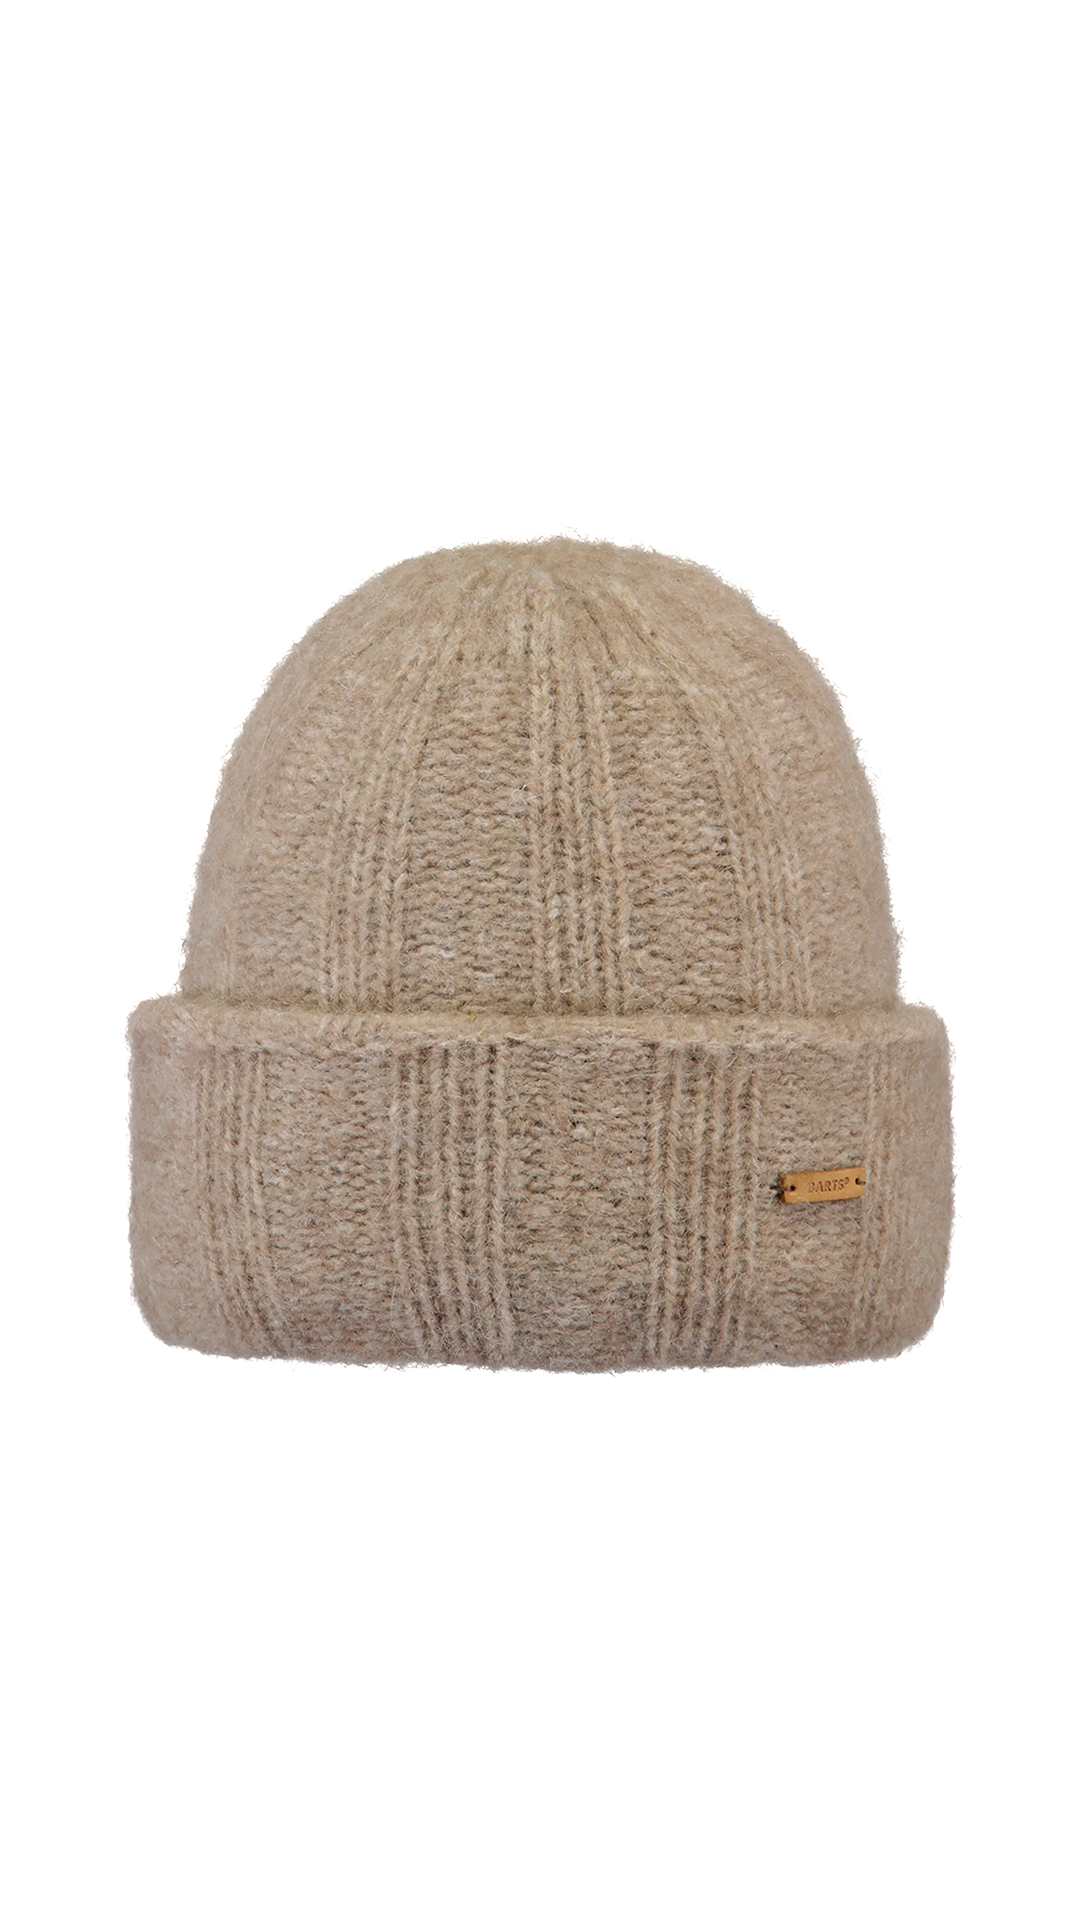 Rush light Beanie BARTS brown BARTS now at - Order River